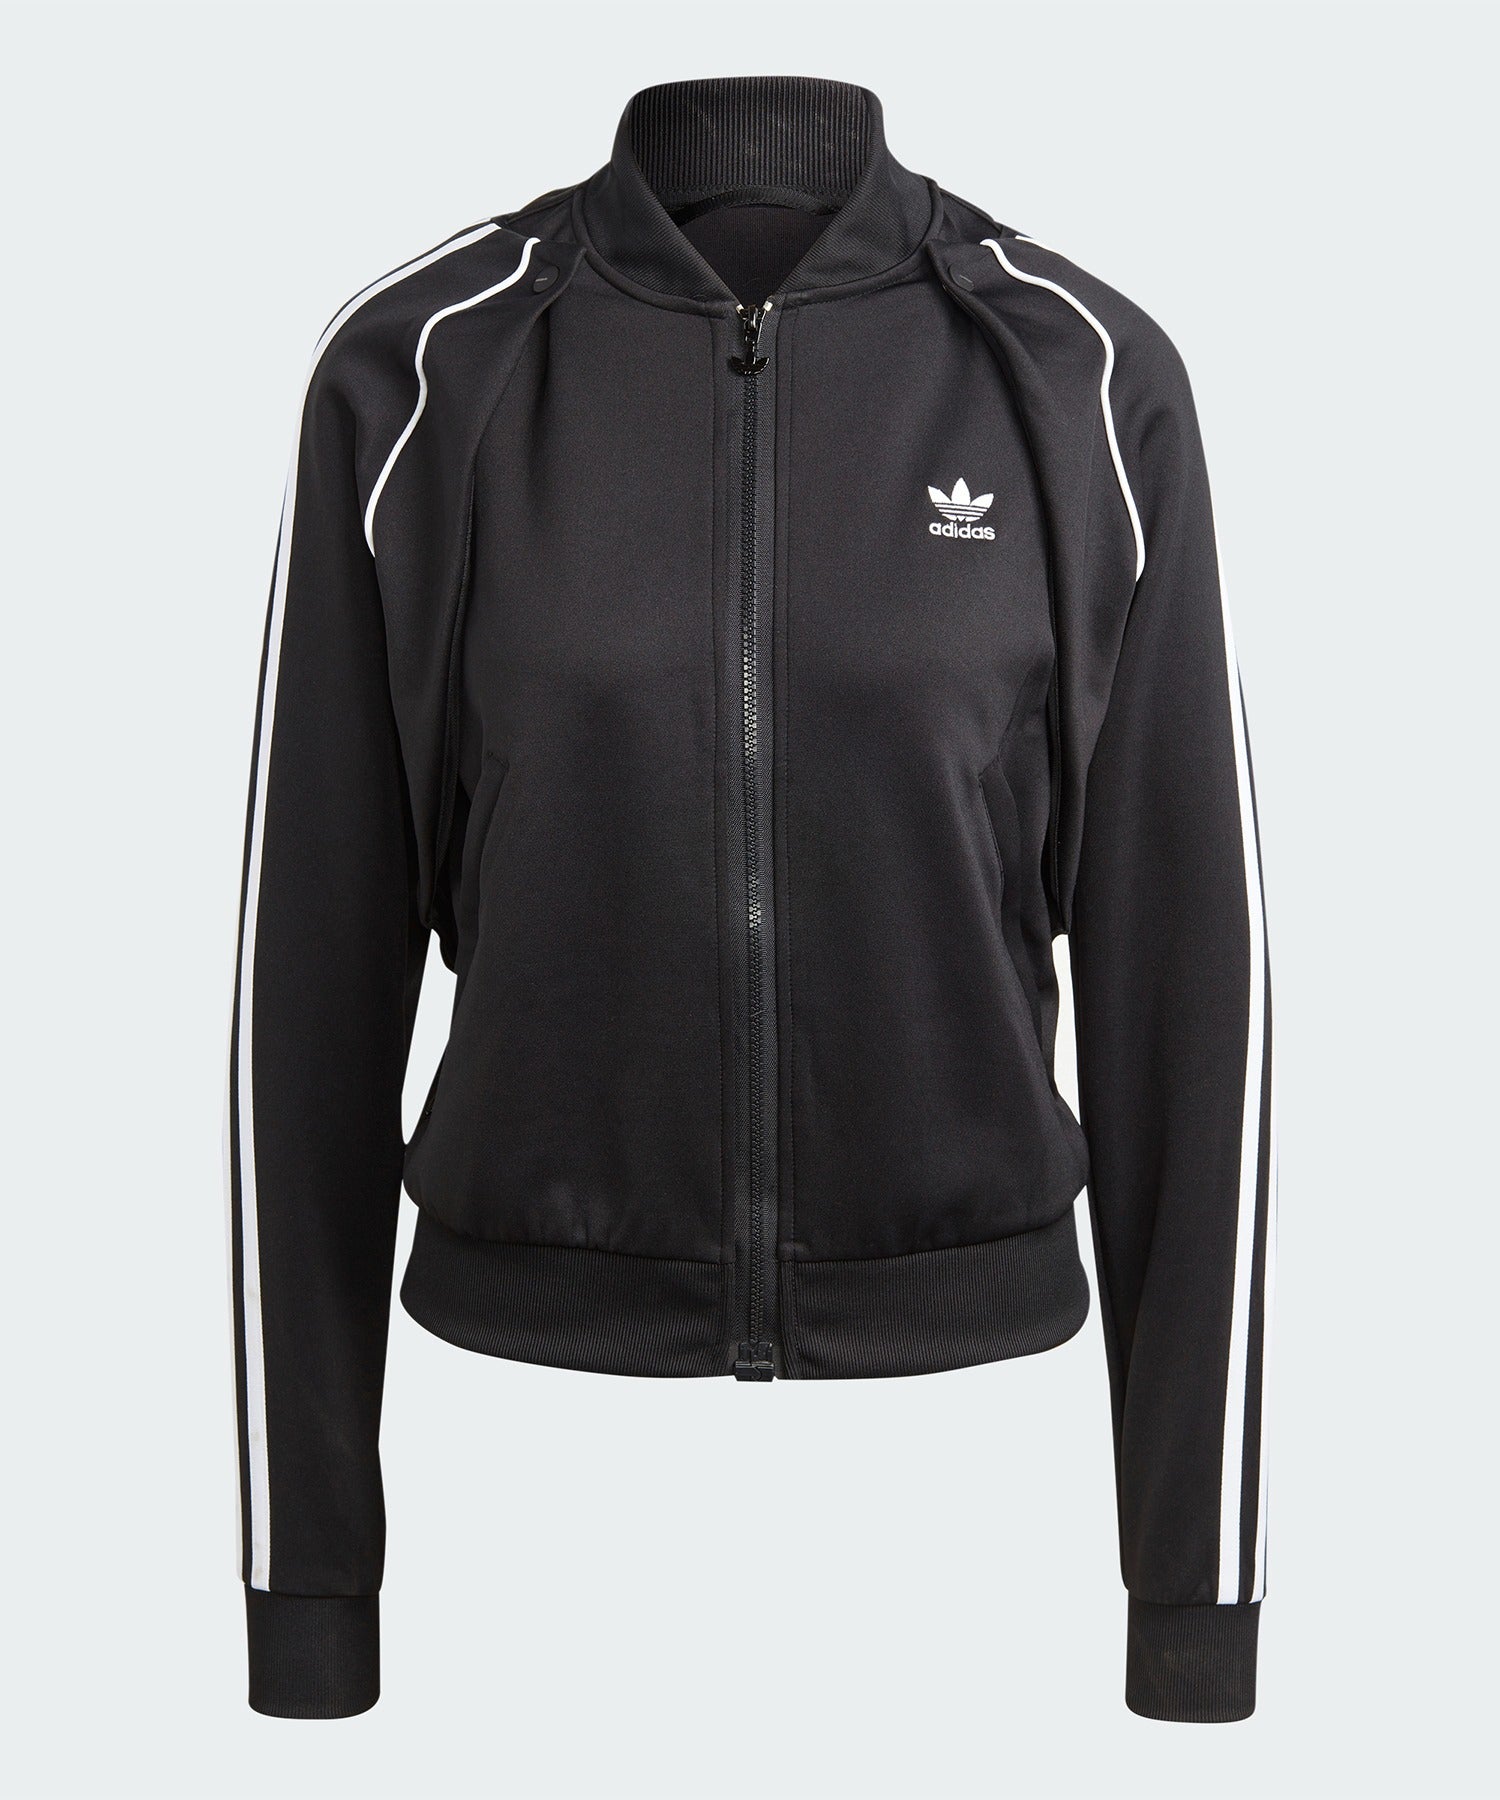 SS TRACK TOP